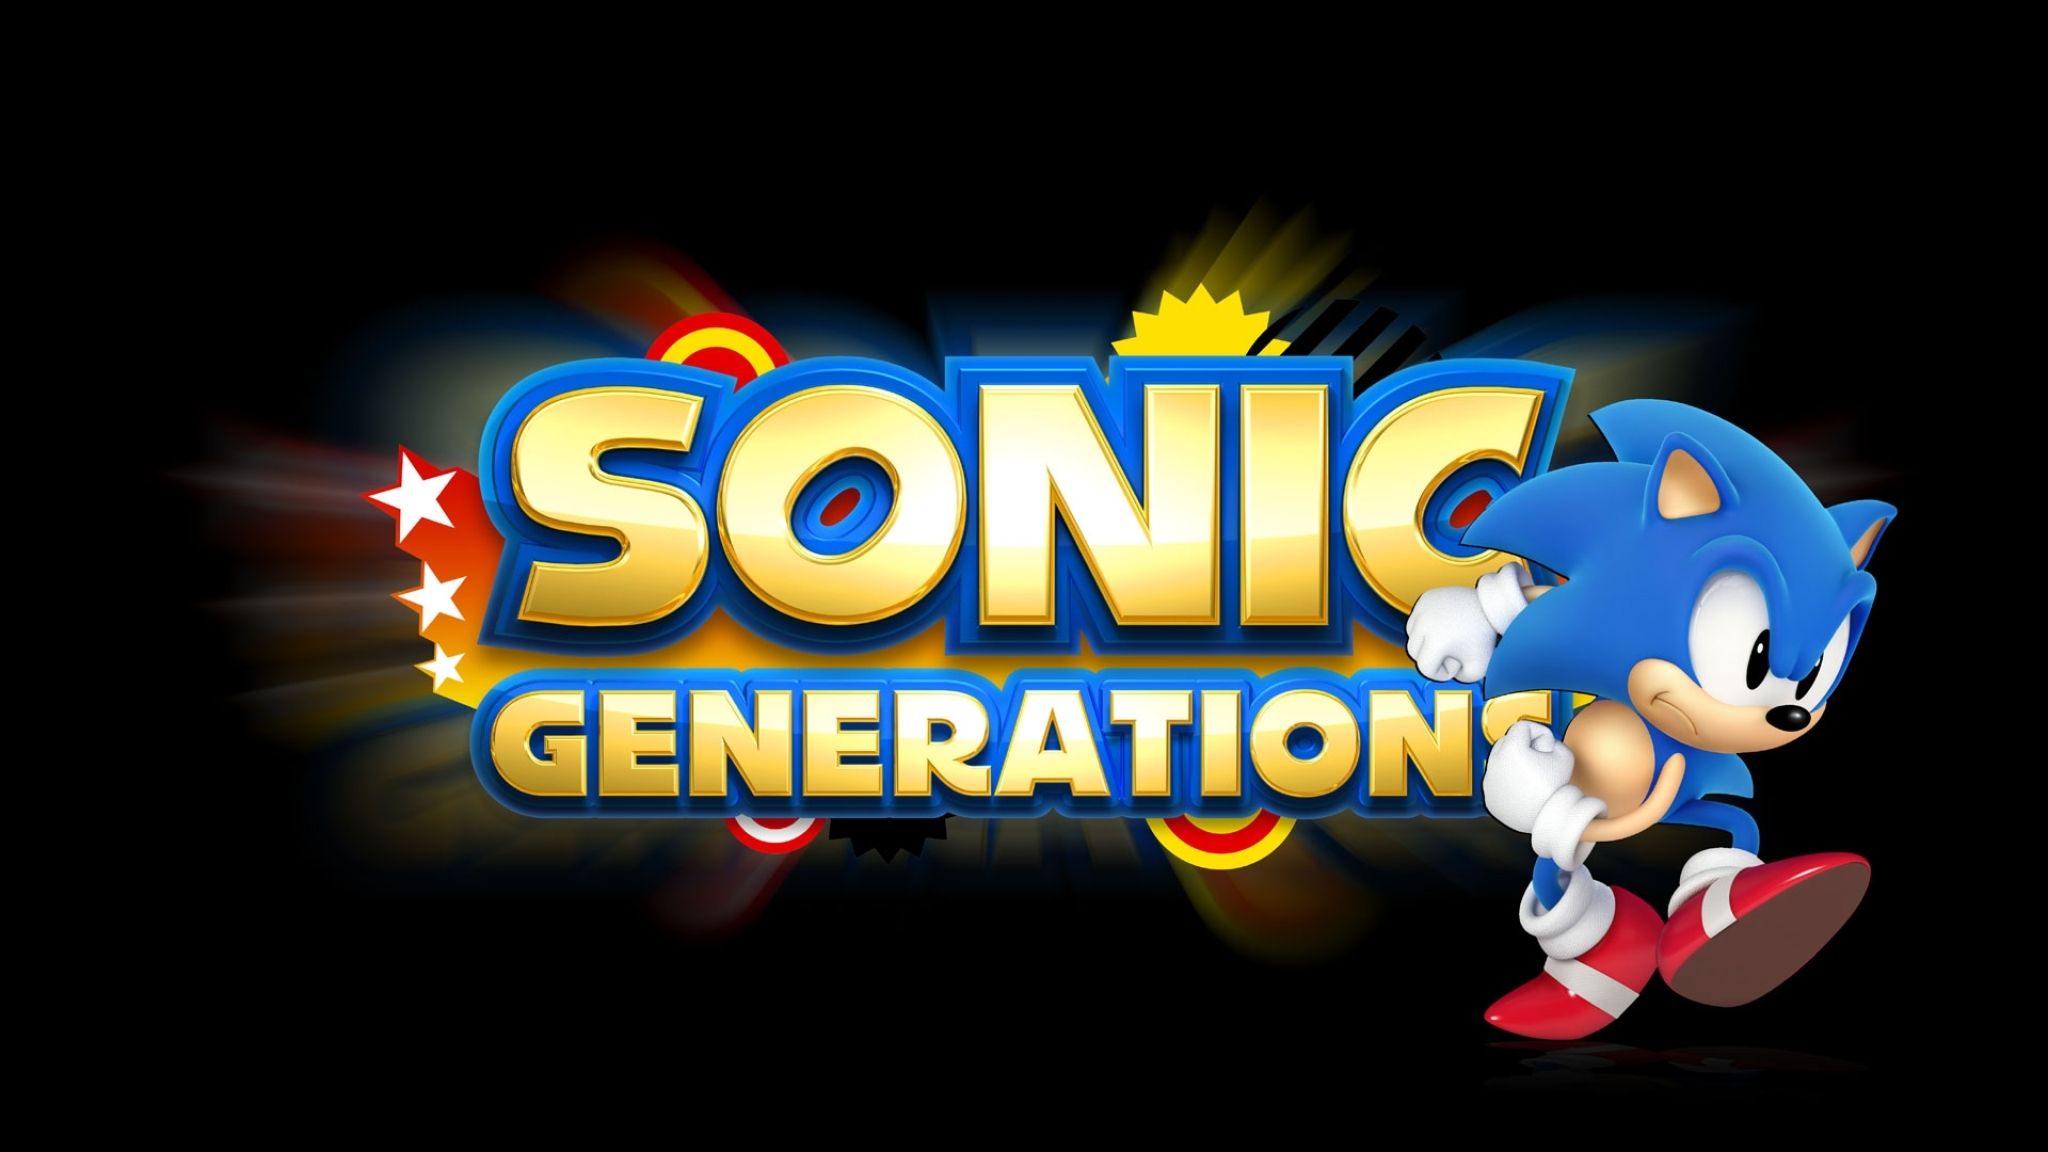 sonic generations, name, font 2048x1152 Resolution Wallpaper, HD Games 4K Wallpaper, Image, Photo and Background